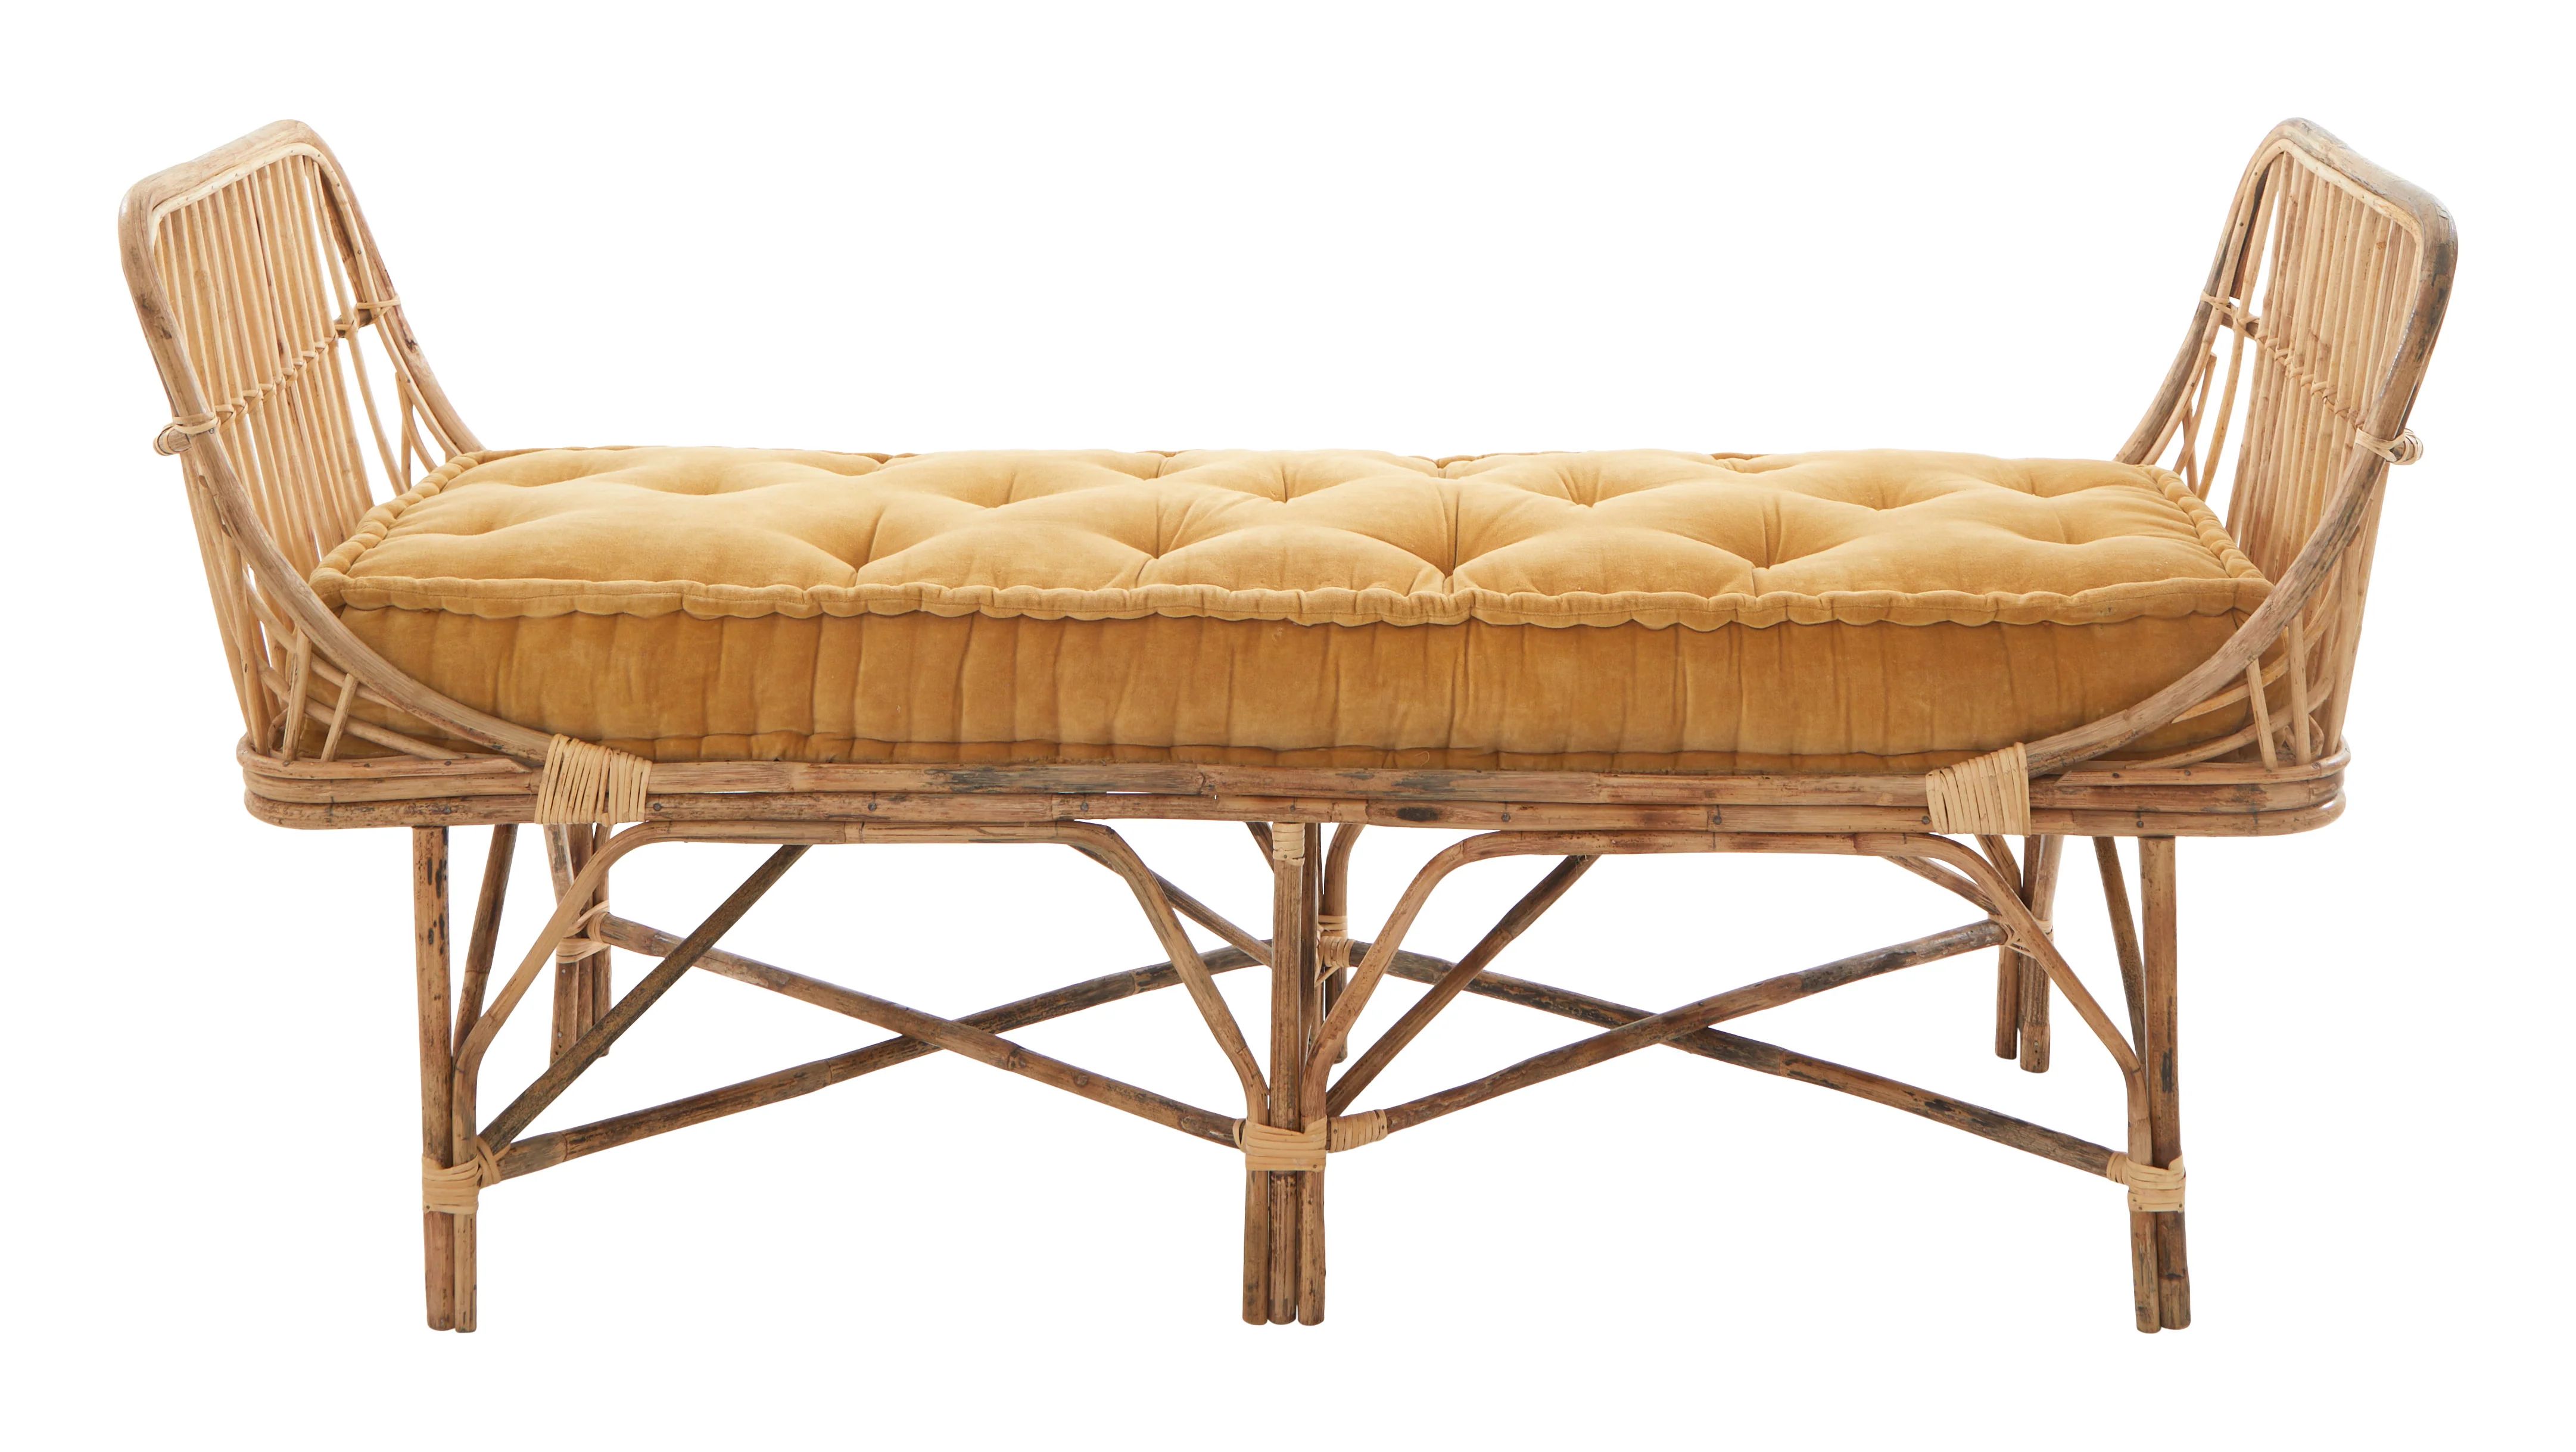 Belize Daybed | Jayson Home